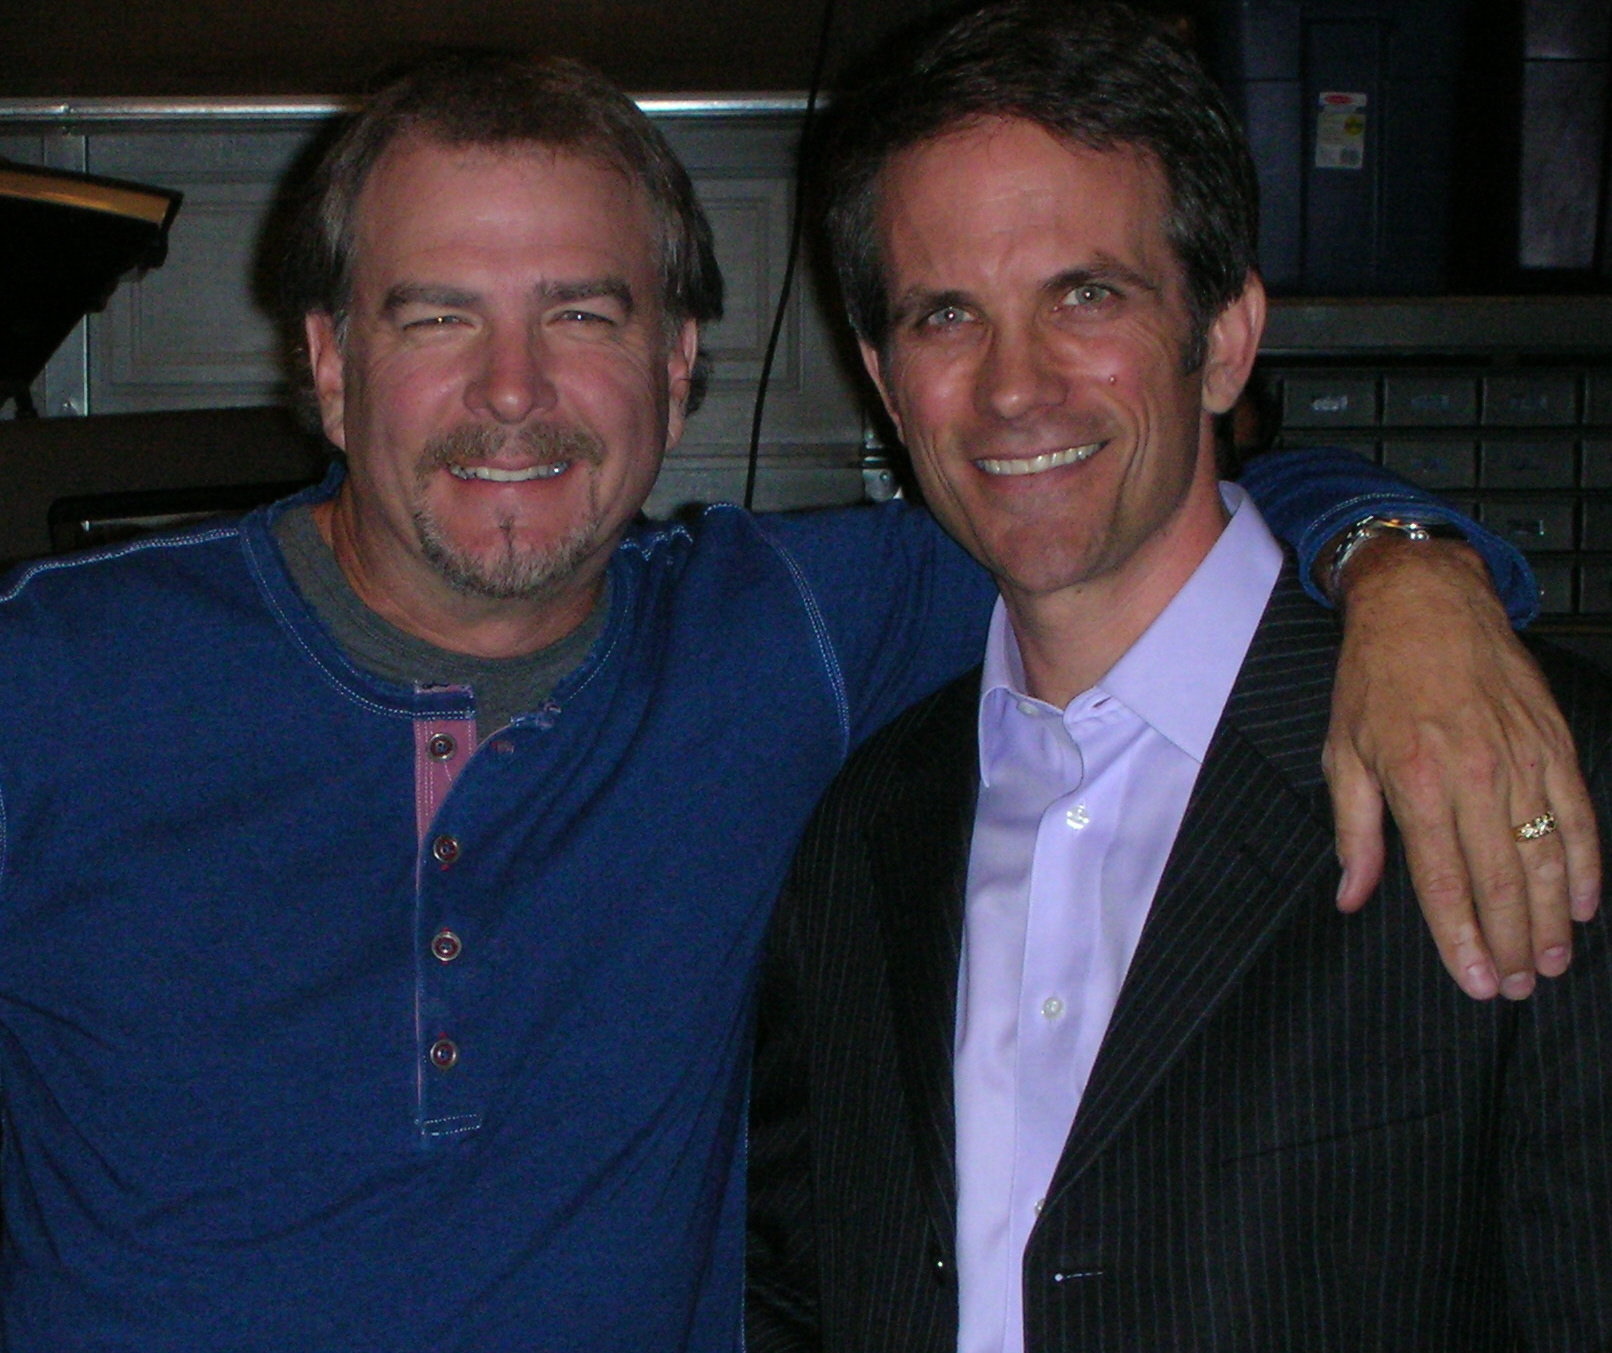 Bill Engvall & Mel Fair on the set of The Bill Engvall Show, episode 